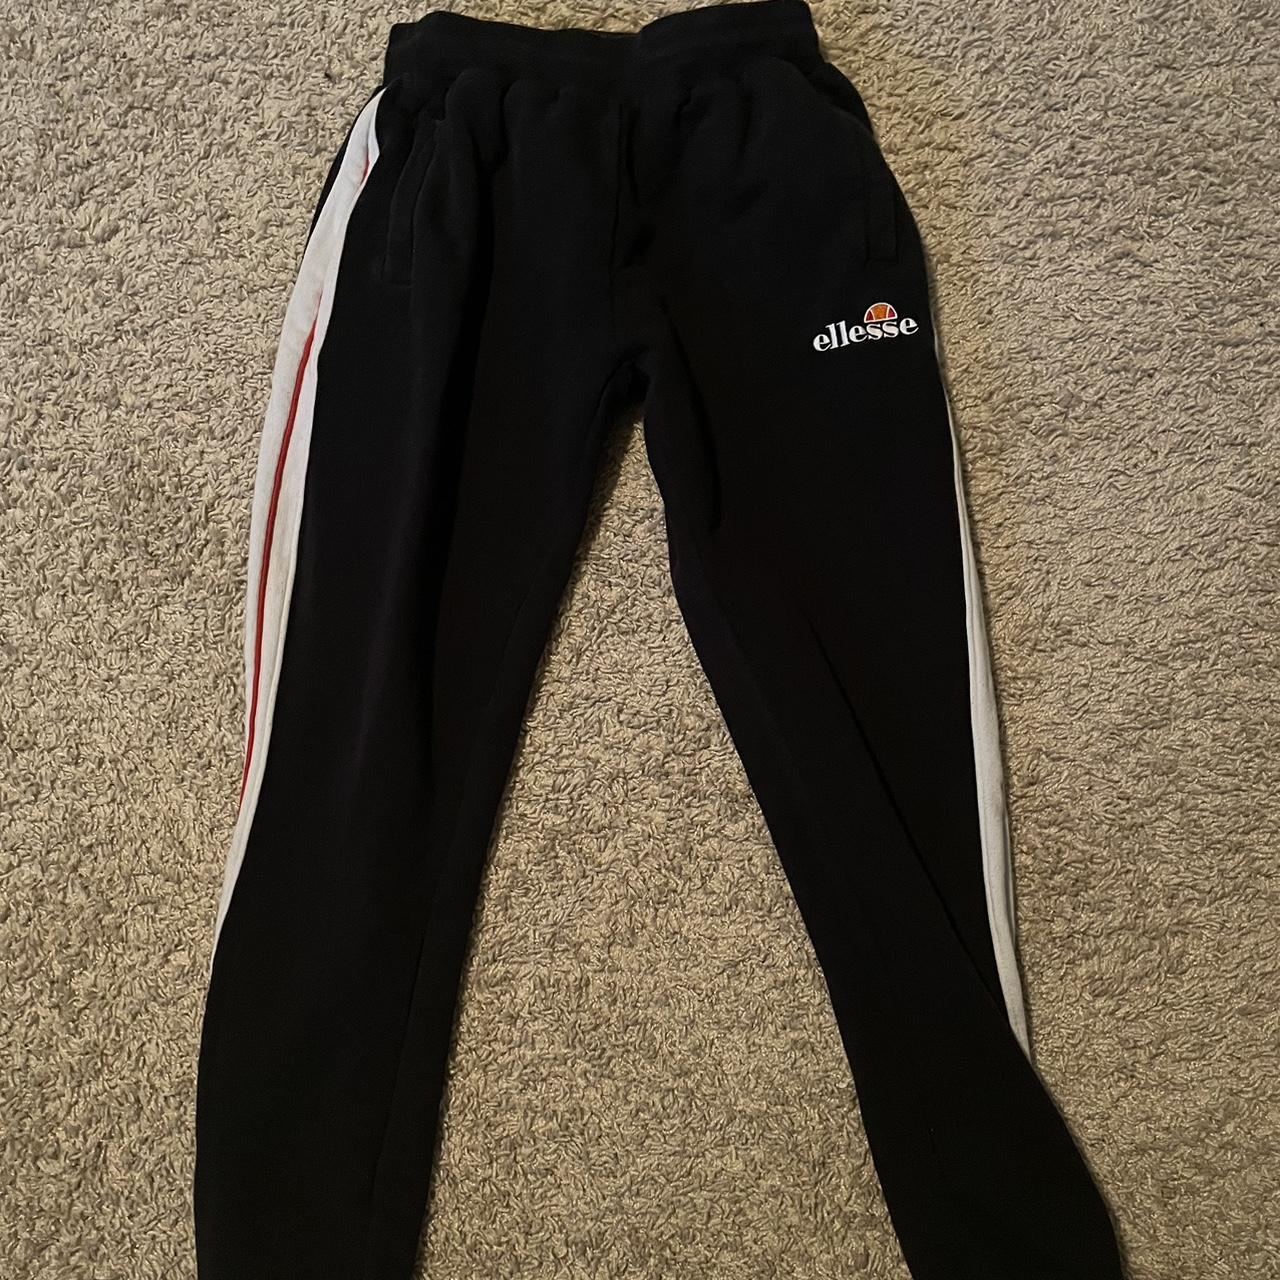 Ellesse Men's Black and White Joggers-tracksuits (2)